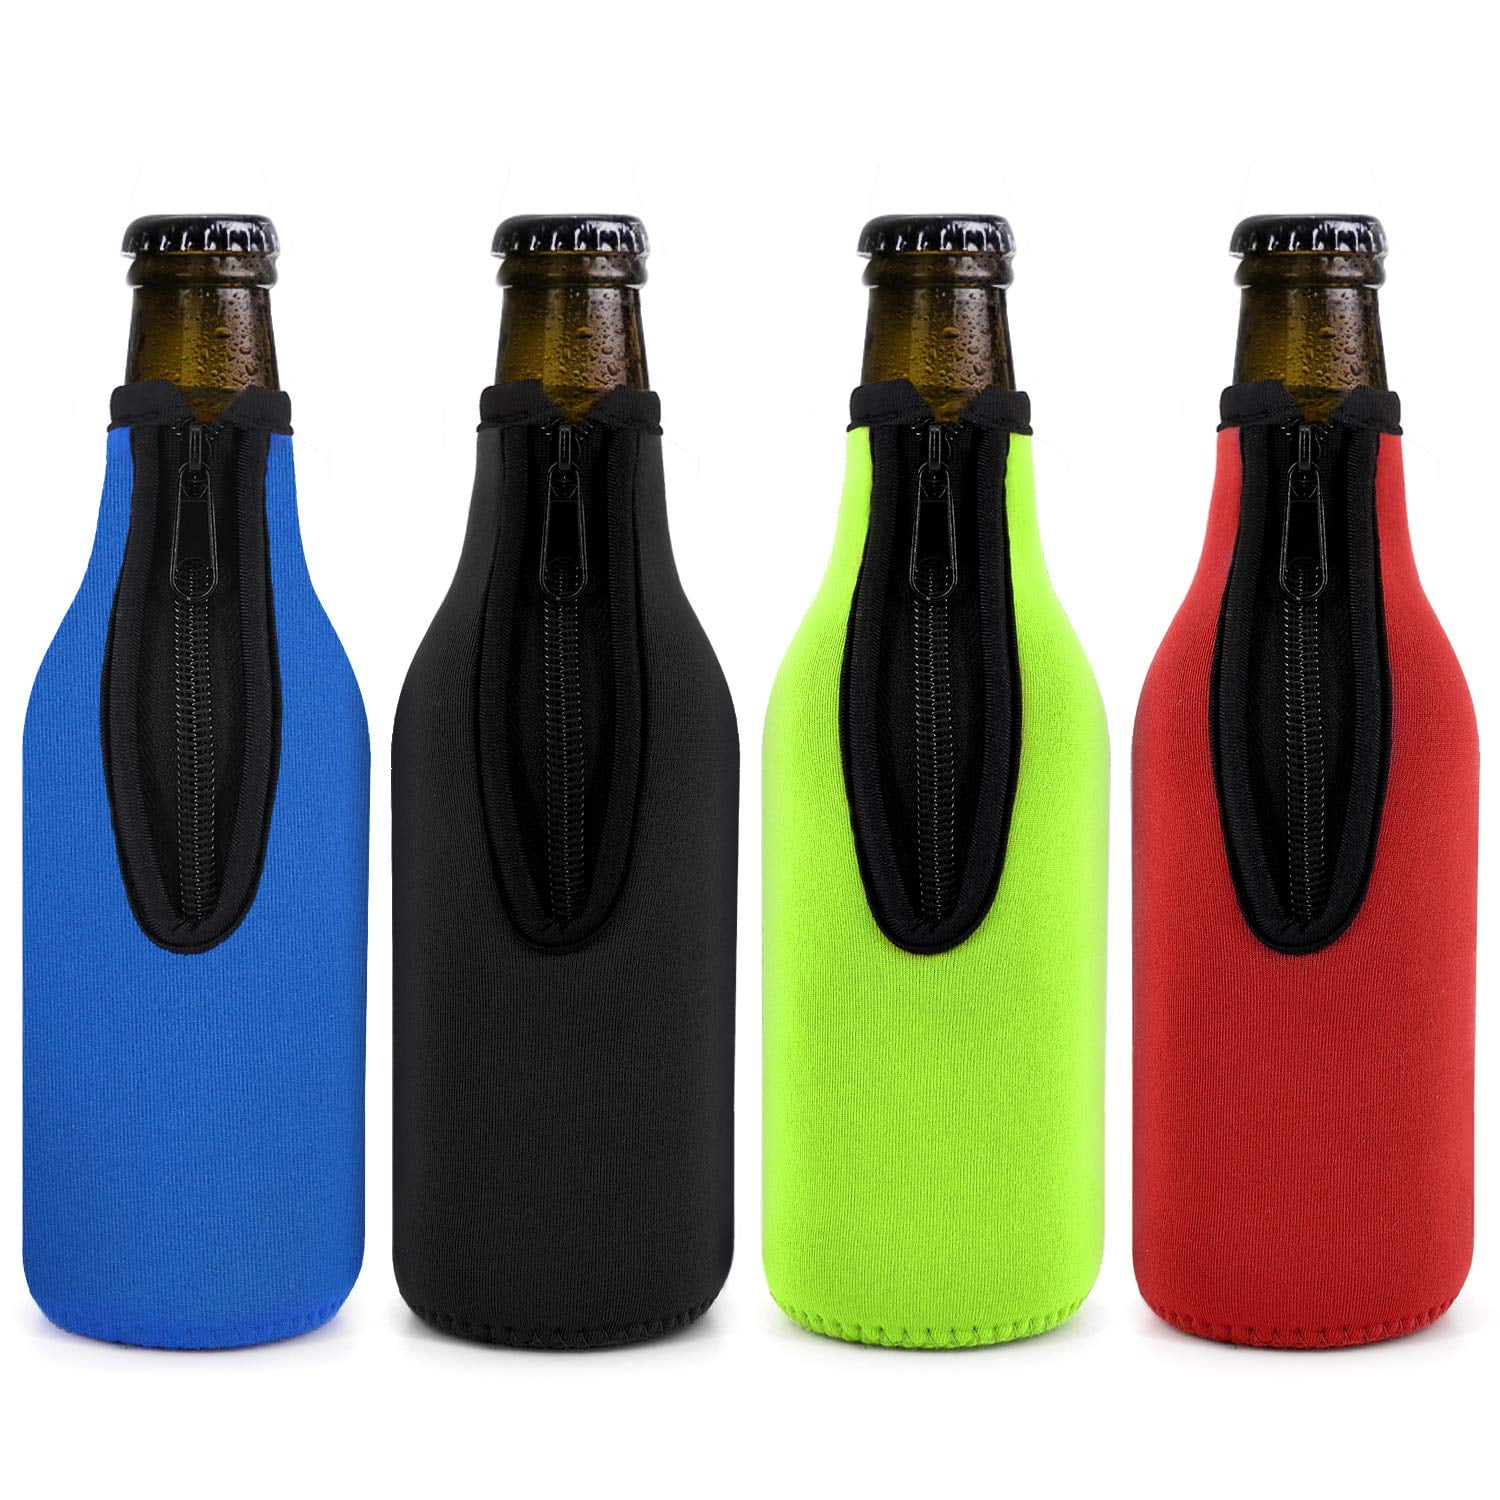 A... Insulated Beer Can Cover Sleeve Cooler,Neoprene with Stitched Fabric Edges 